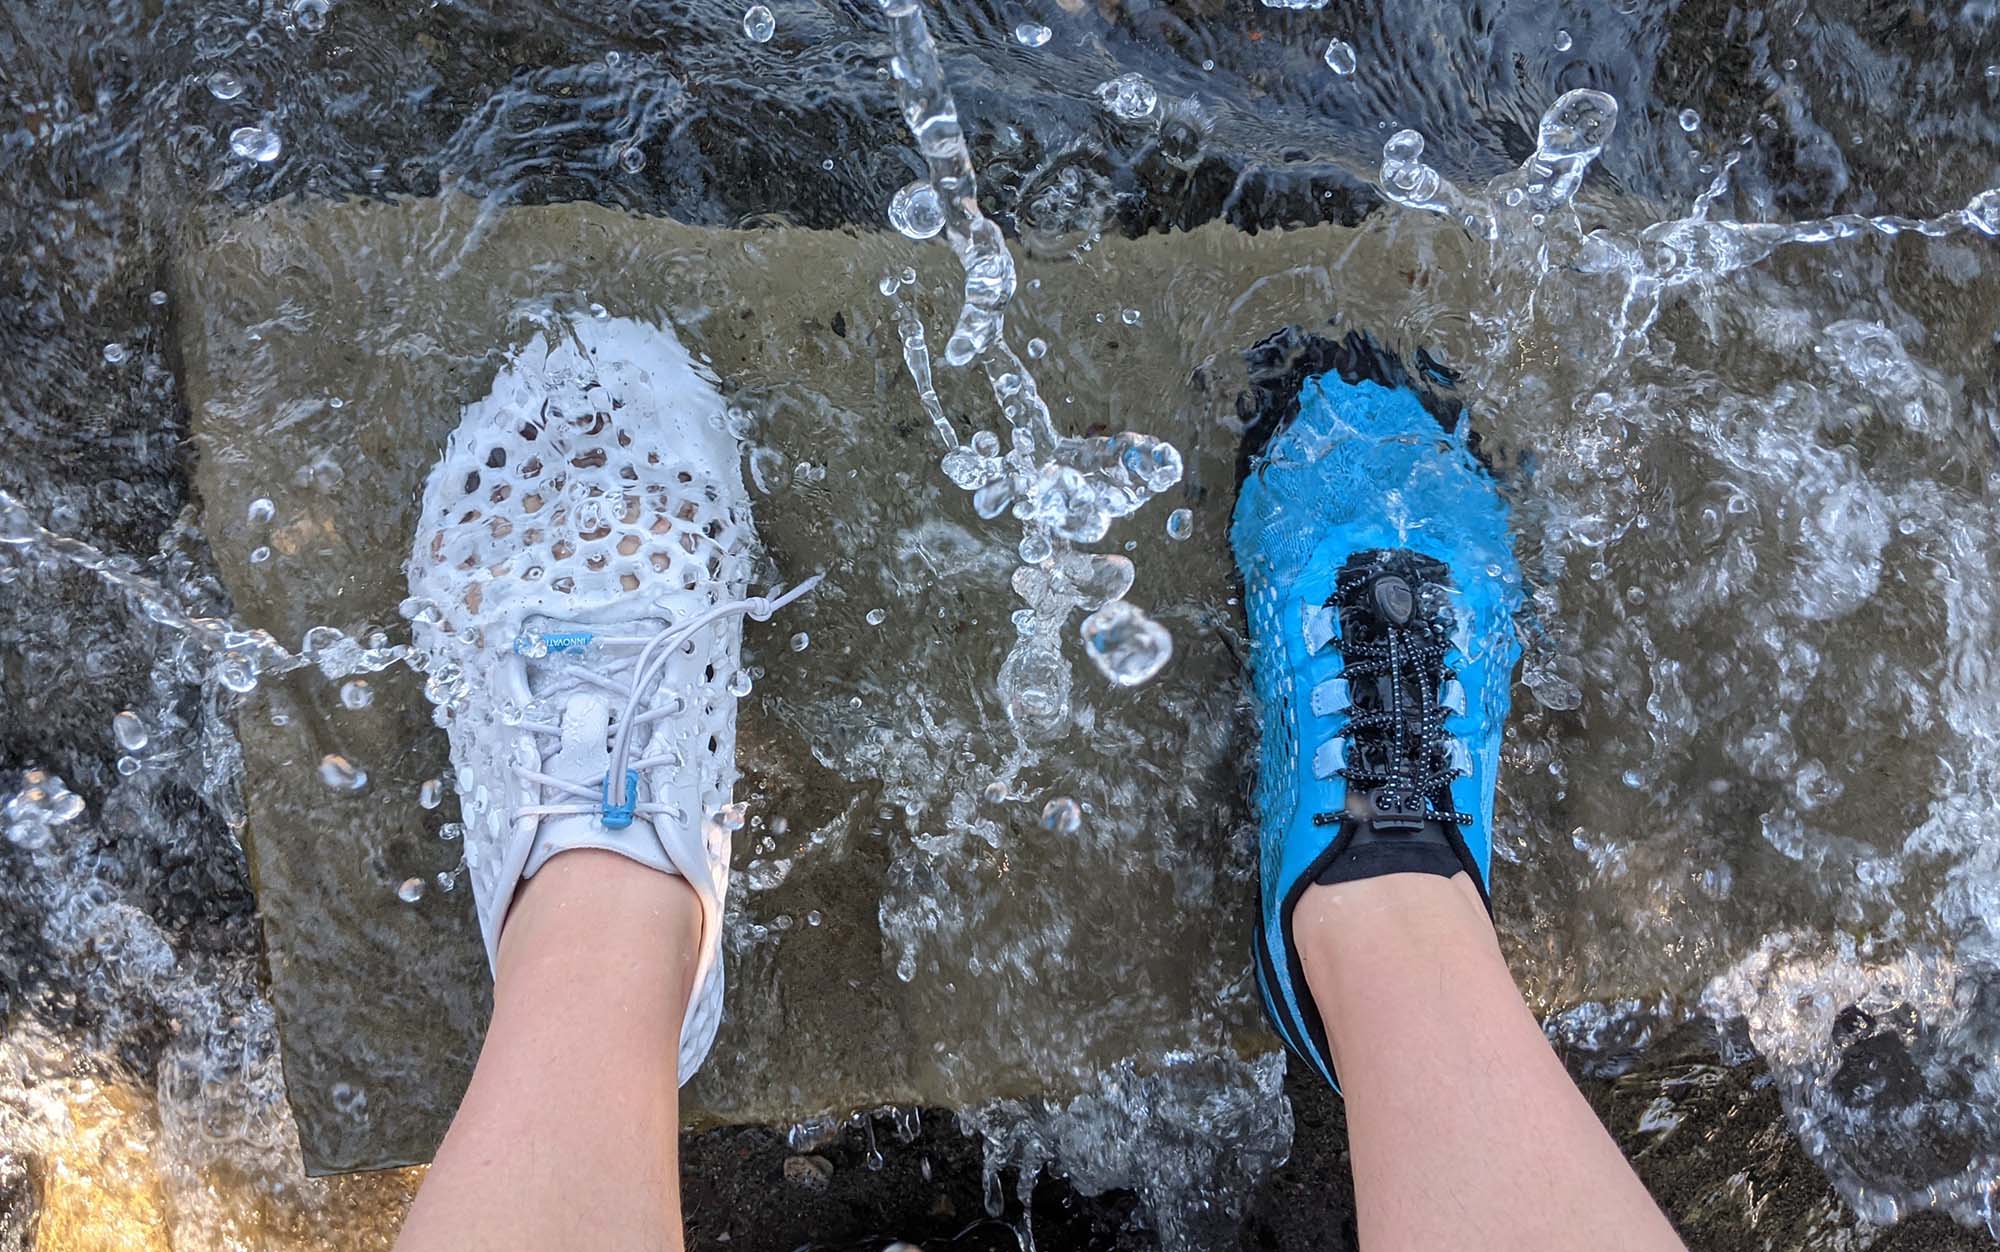 Even though they are both minimalist shoes, the foam construction of the Vivobarefoot Ultra III Bloom dried significantly faster than the fabric of the XeroShoes Aqua X Sport.